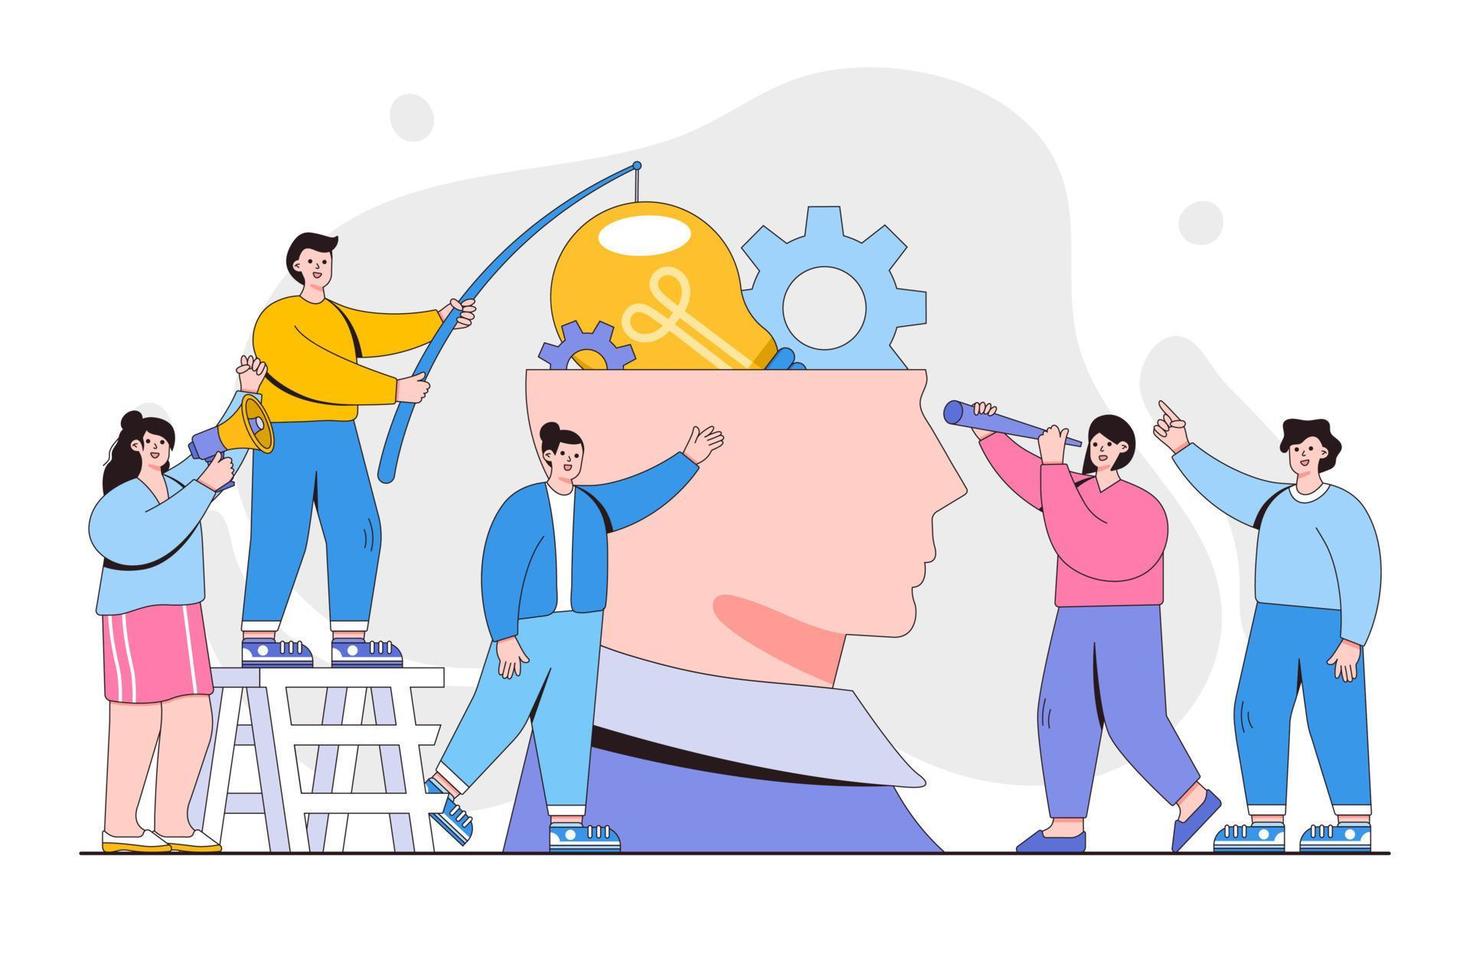 Creative idea in head, teamwork brainstorming, ideological thinking to solve and create new innovative projects. Outline design style minimal vector illustration for landing page, hero images